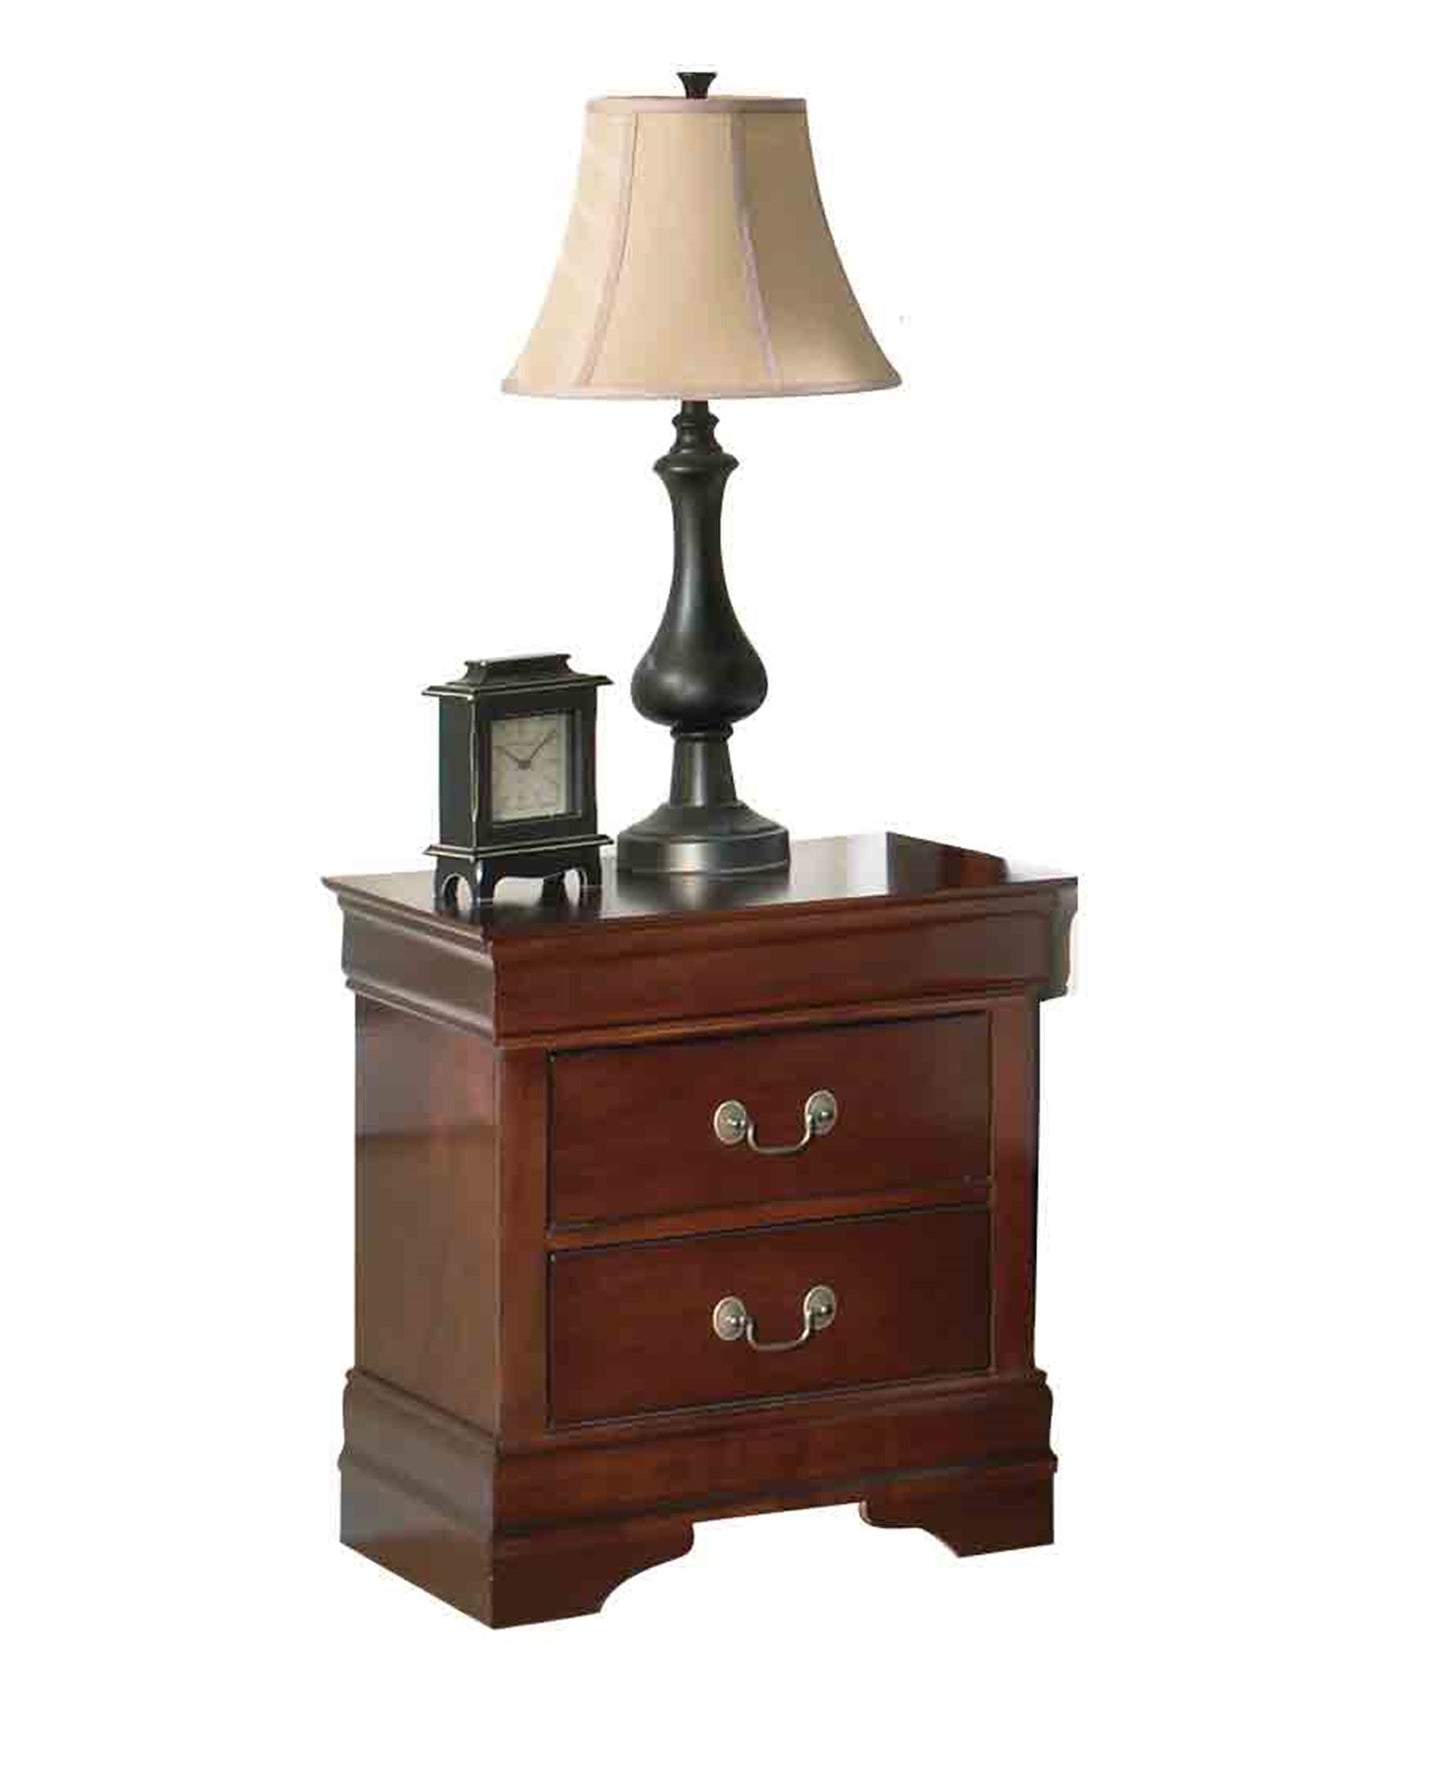 Ashley Alisdair 6PC Bedroom Set E King Sleigh Bed Two Nightstand Dresser Mirror Chest in Dark Brown - The Furniture Space.